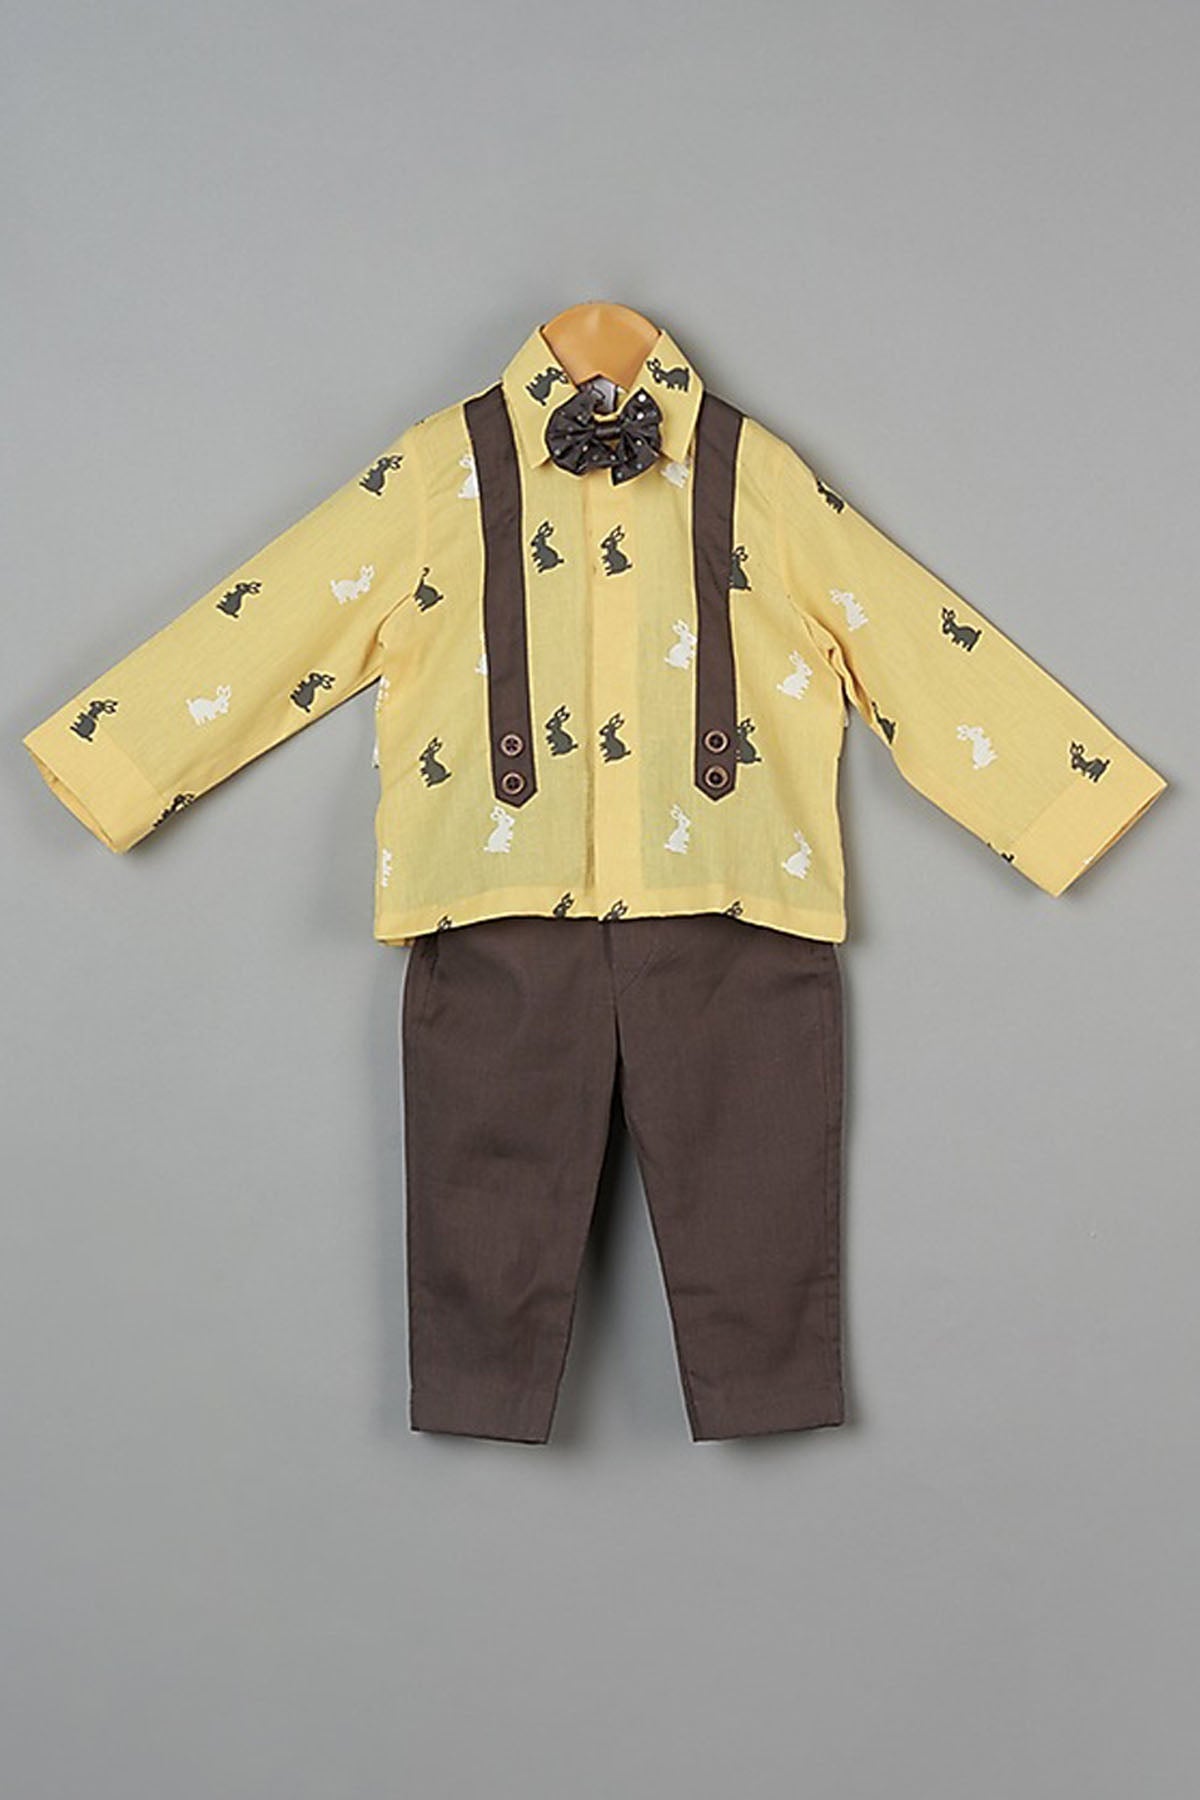 Designer Little Brats Yellow Bunny Print Suit For Kids Available online at ScrollnShops